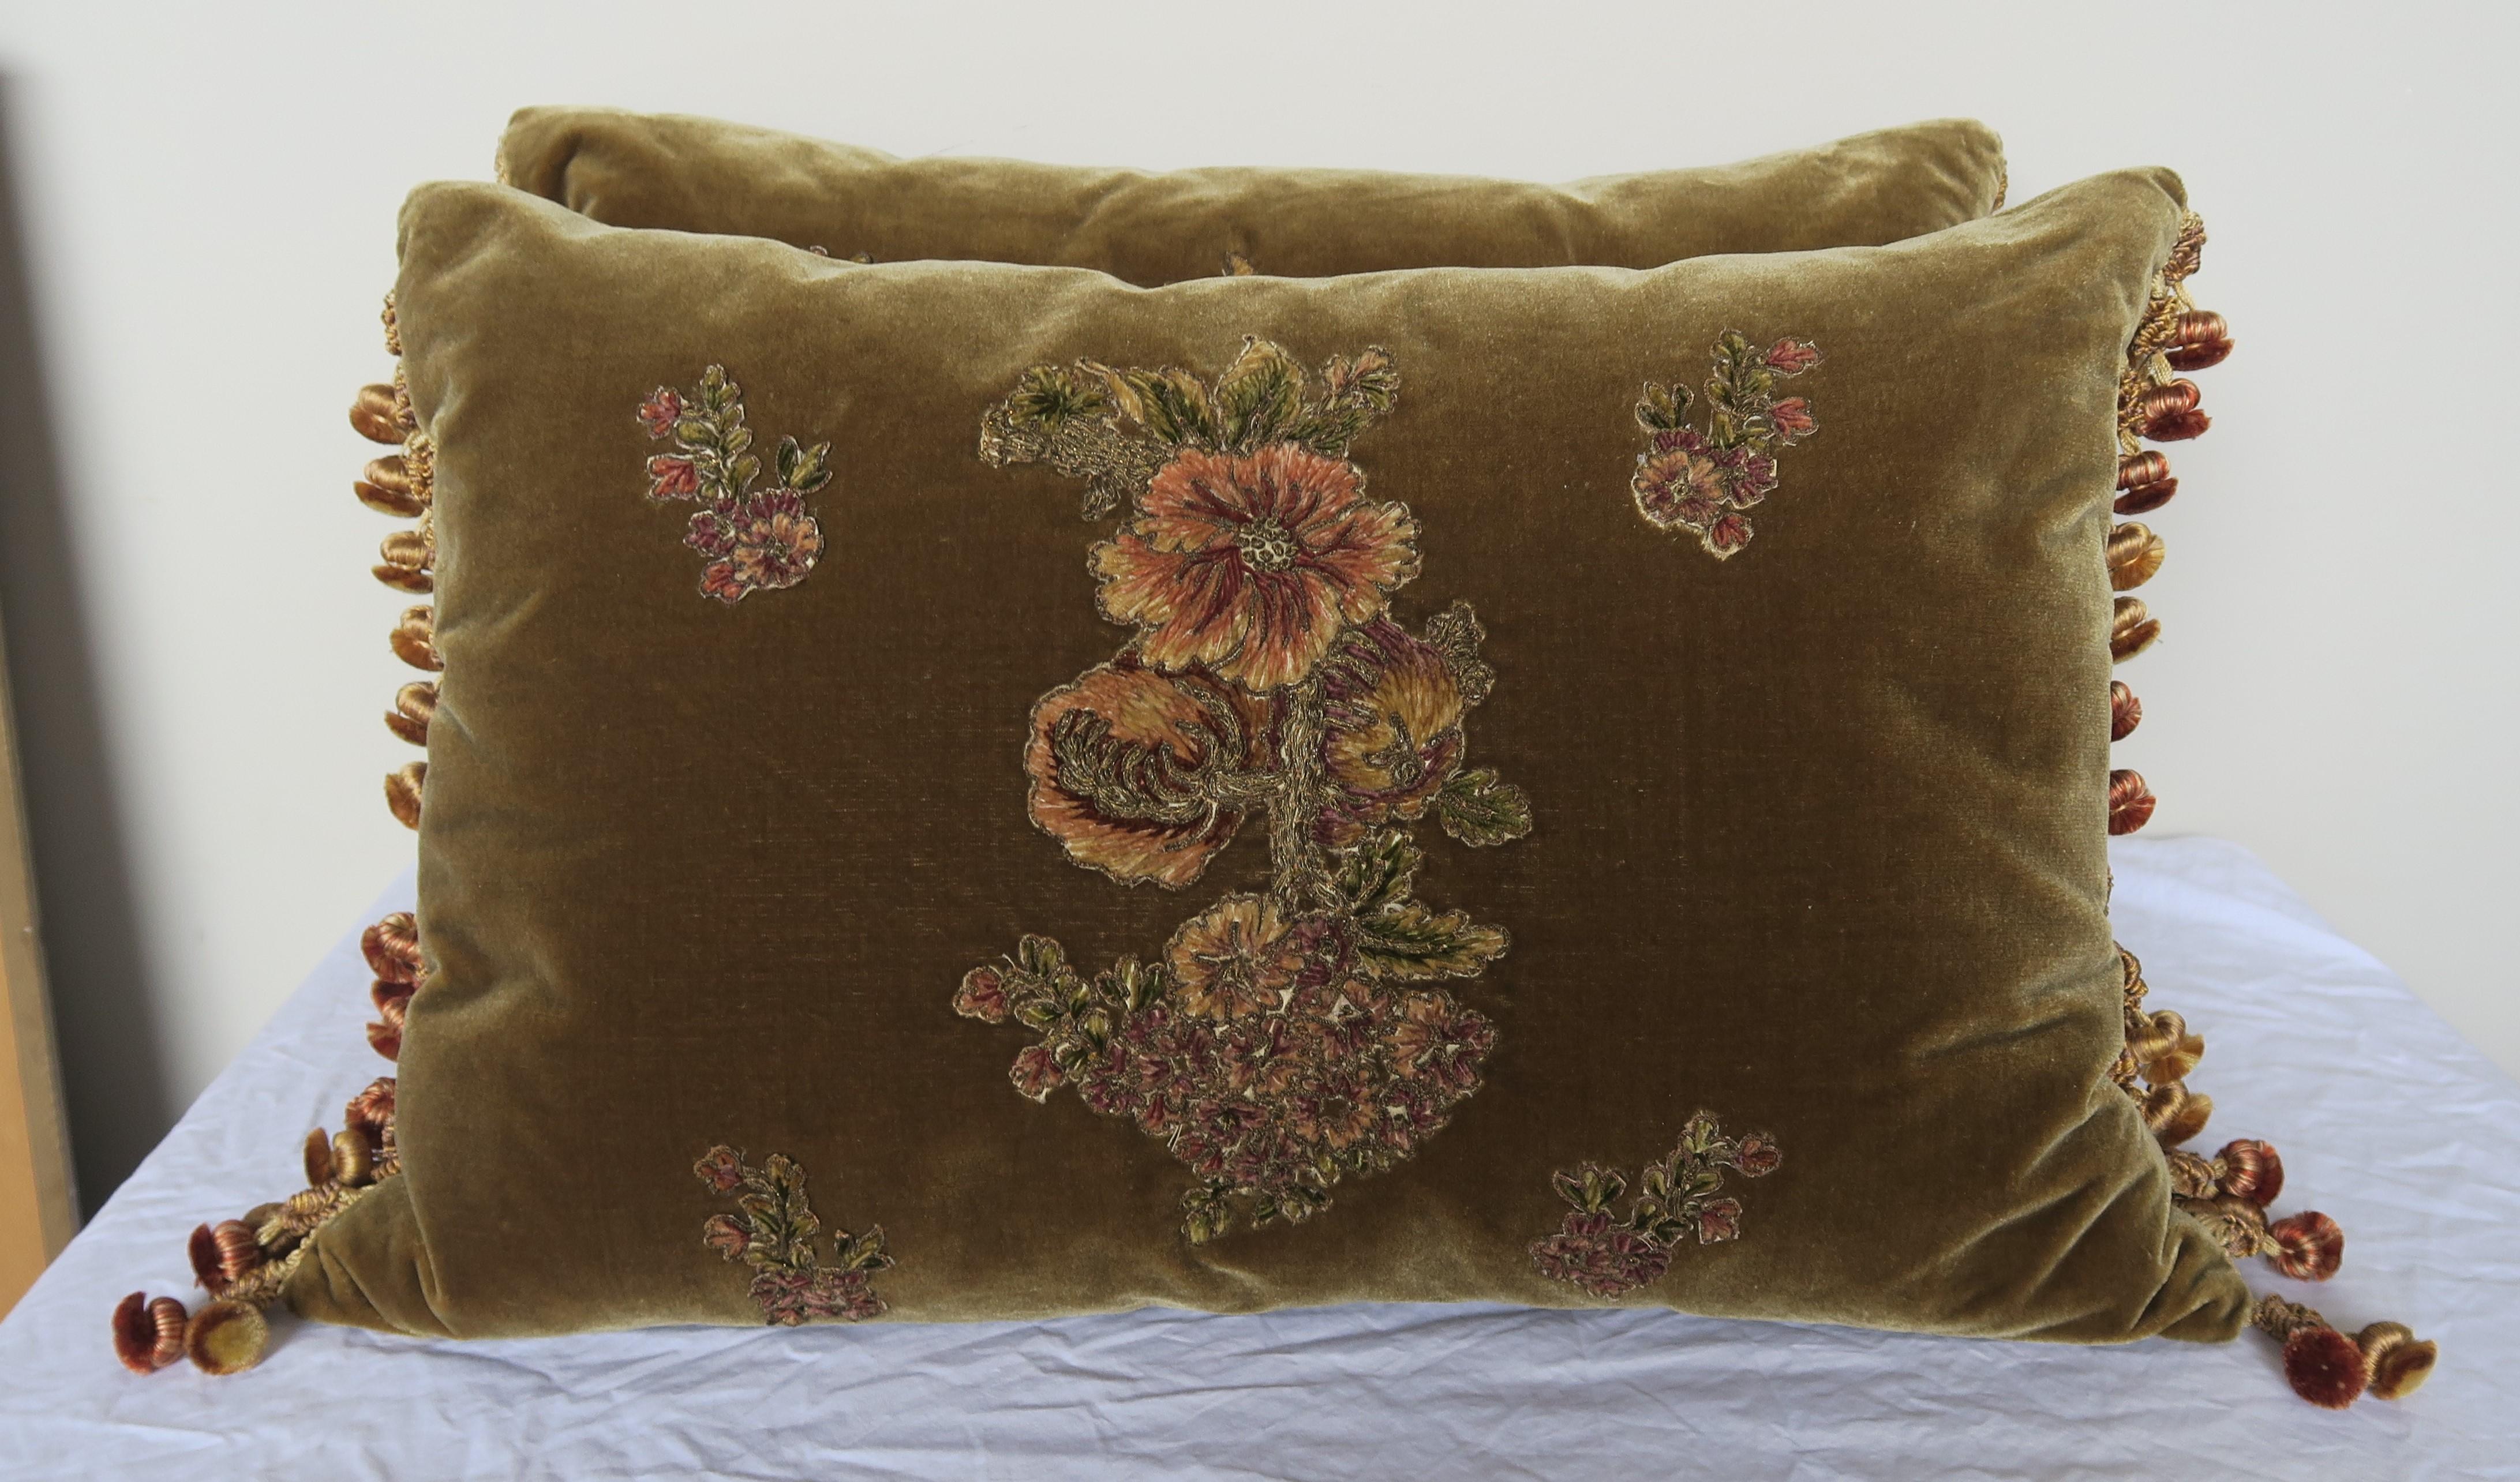 Pair of custom pillows made with 19th century French metallic and chenille appliquéd silk velvet fronts and silk backs. Tassel trim at sides of pillows. Down inserts, sewn closed.